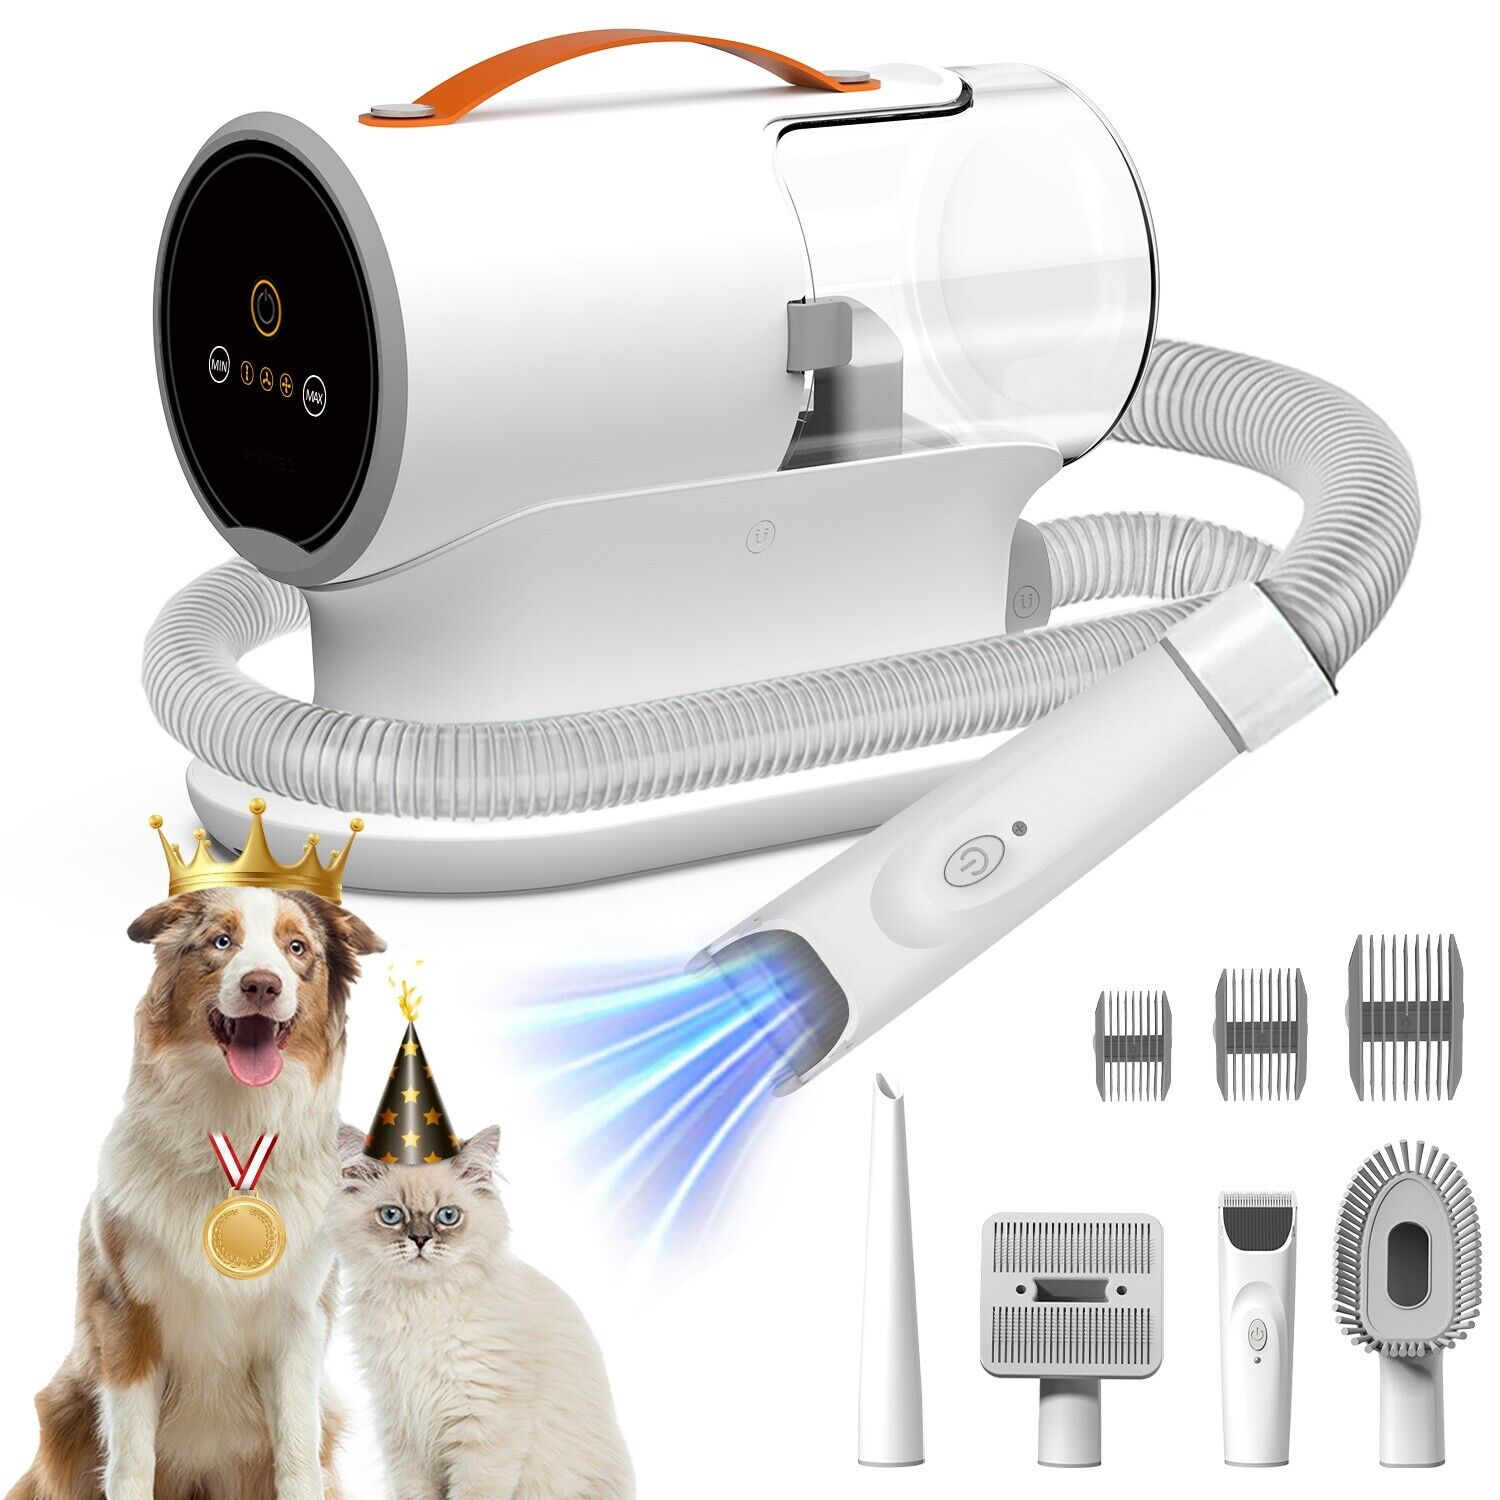 AIRROBO PG100 Pet Grooming Vacuum with 5 Grooming Tools 12000Pa Suction Power US